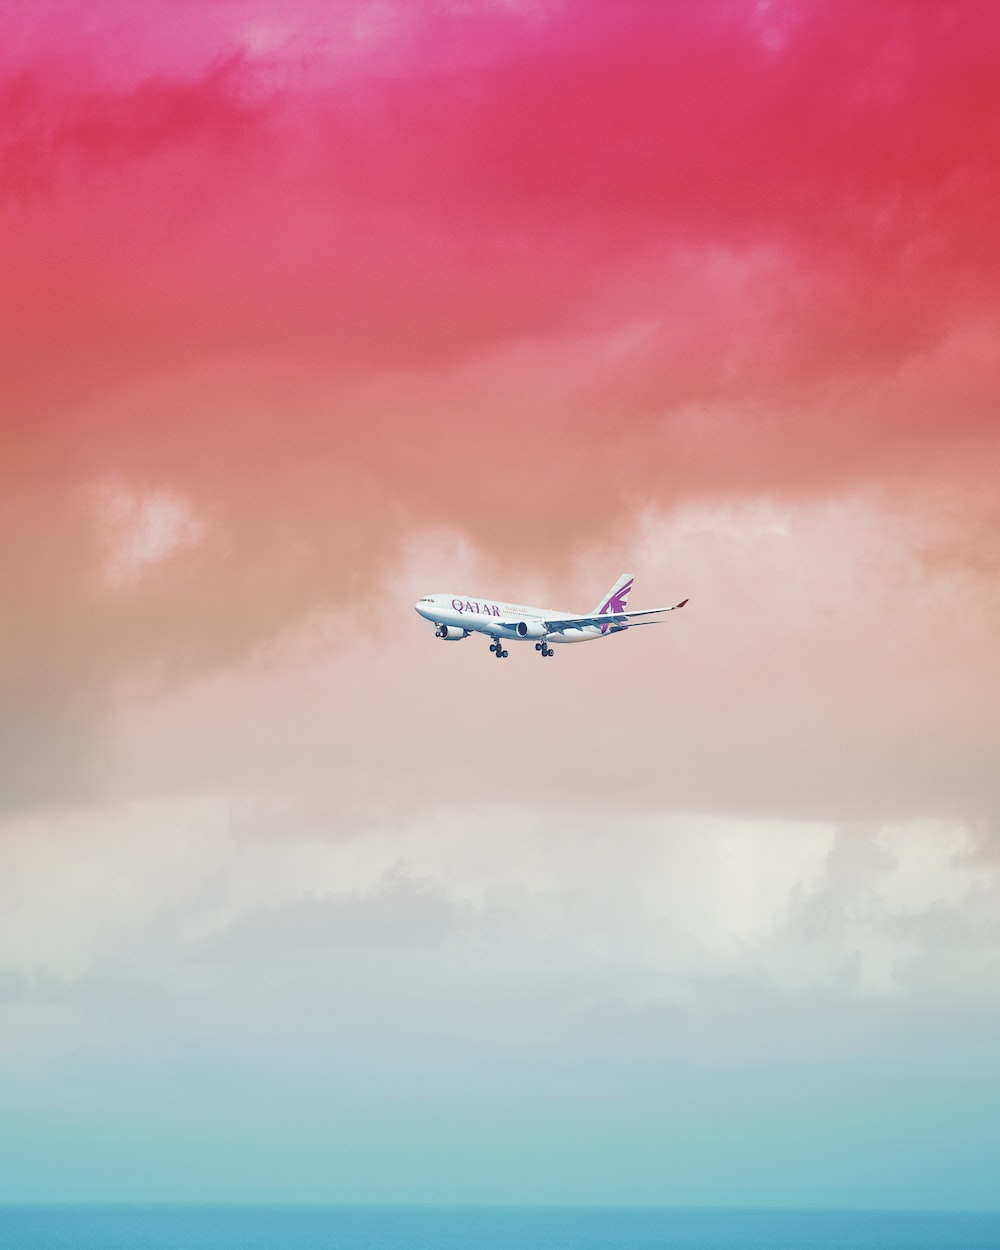 Plane Wallpaper Picture. Download Free Image